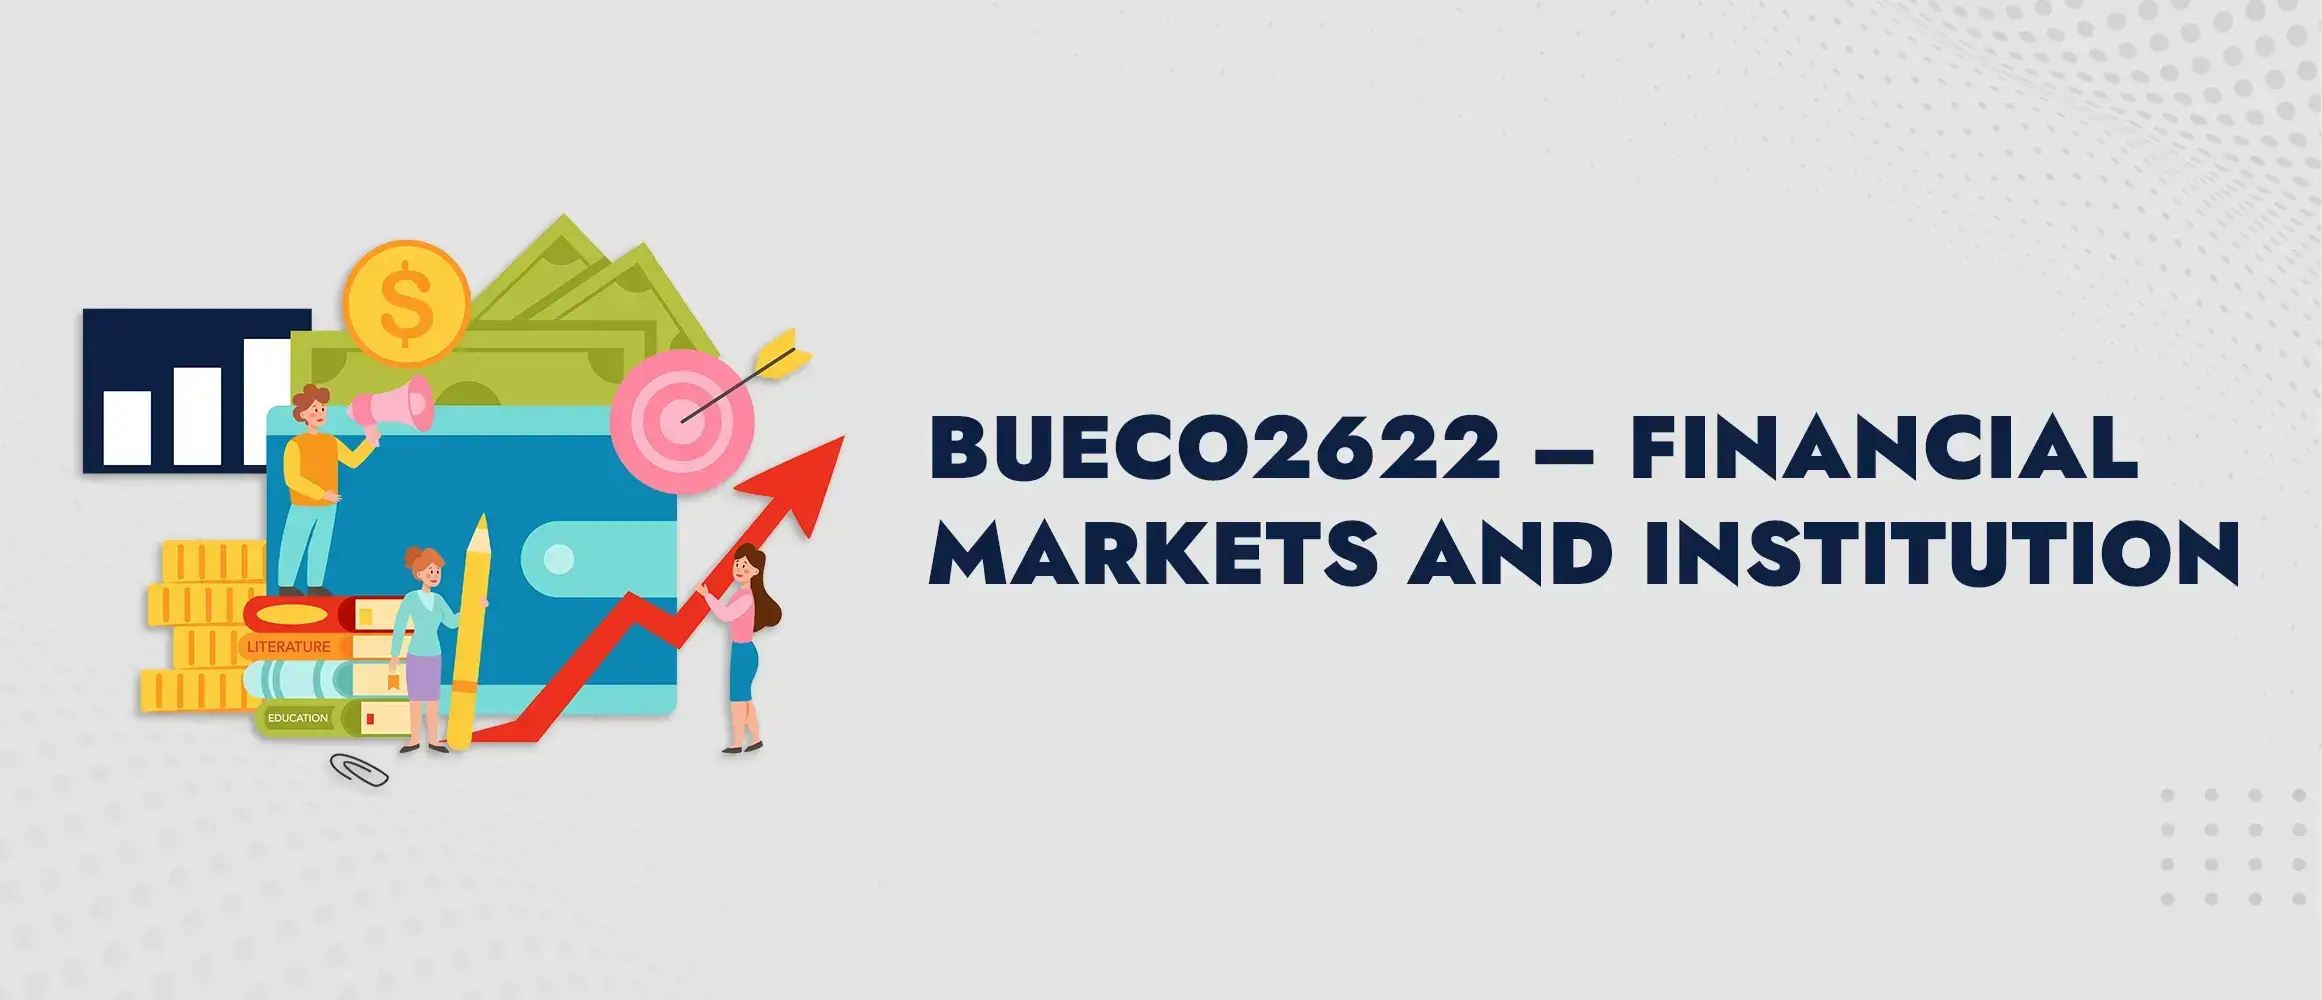 BUECO2622 Financial Markets and Institution